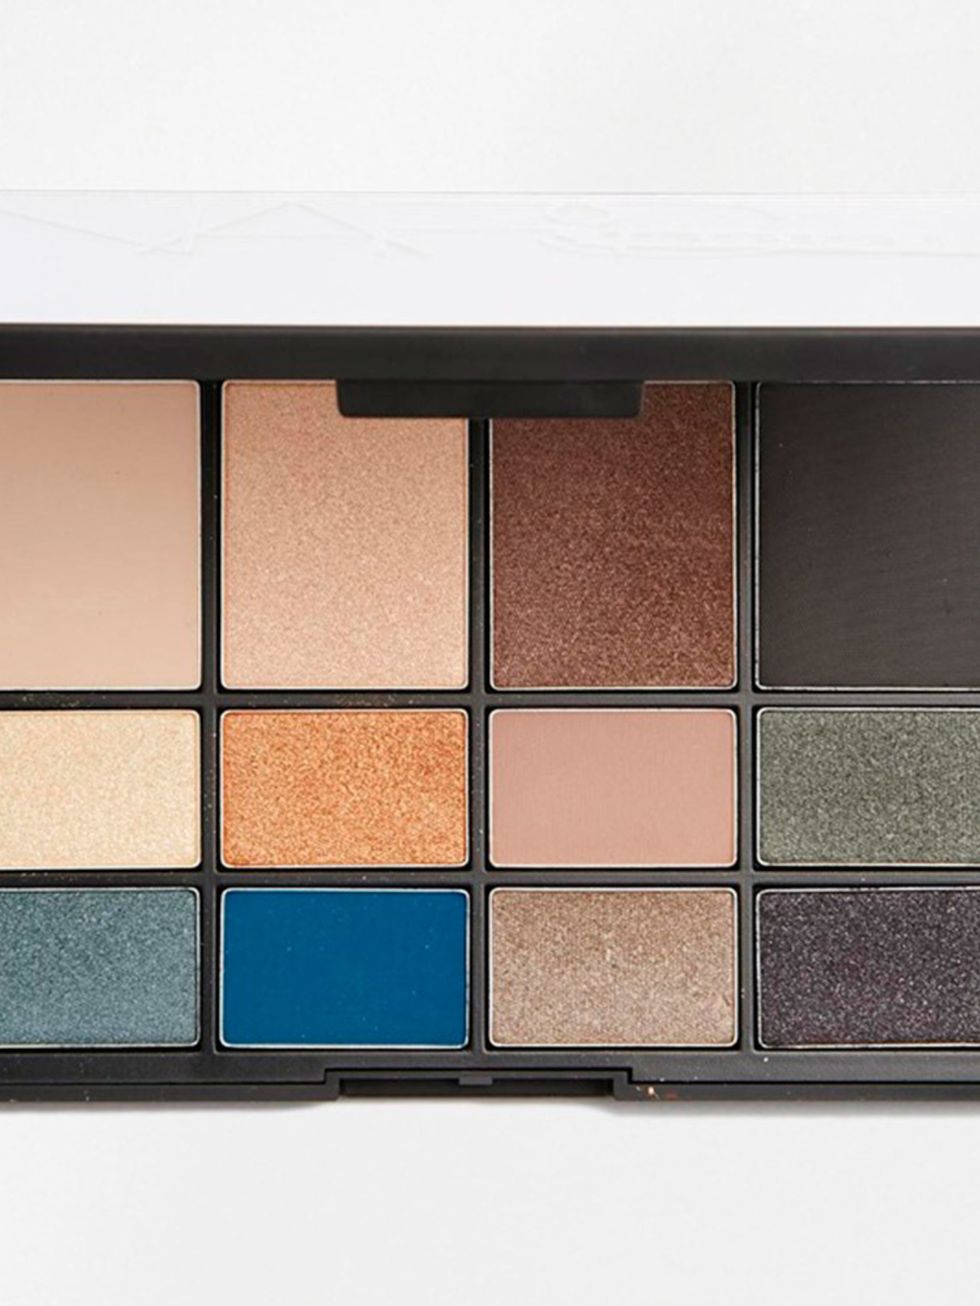 <p><a href="http://www.asos.com/nars/nars-limited-edition-narsissist-dual-intensity-eyeshadow-palette/prod/pgeproduct.aspx?iid=6338229&amp;clr=Narsissist&amp;SearchQuery=NARS+limited+Edition+NARSissist+Dual-Intensity+Eyeshadow+Palette%2c+%C2%A355&amp;Sear